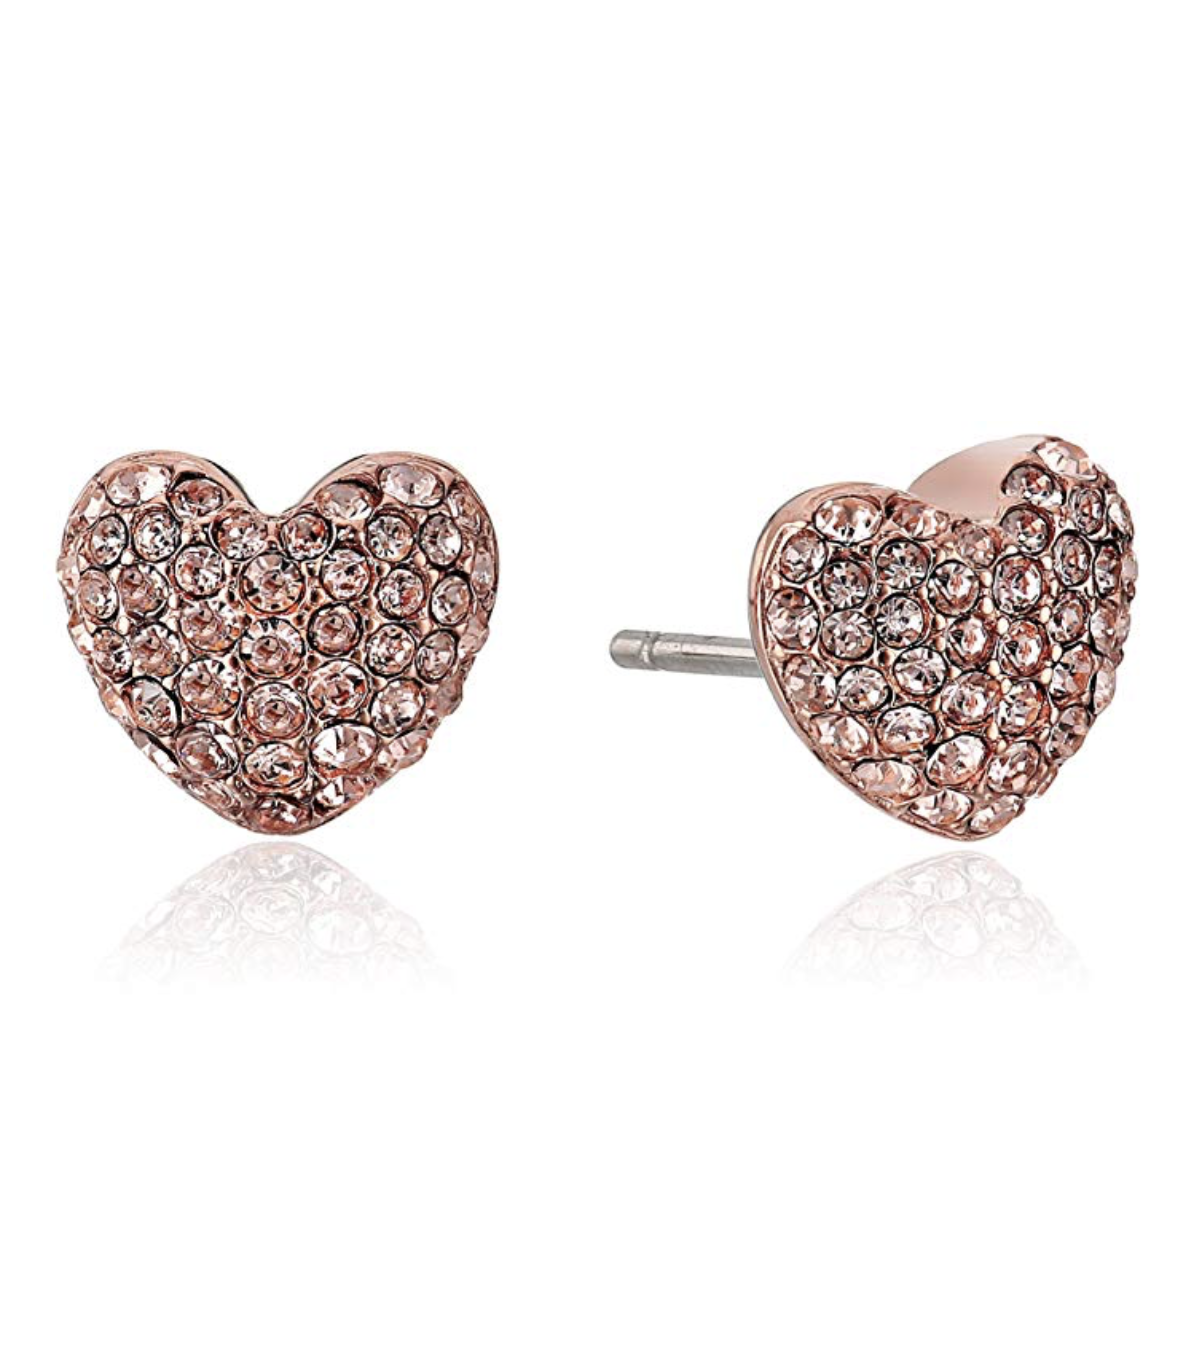 Michael Kors Brilliance Pave Hearts and Crystal Heart Stud Earrings